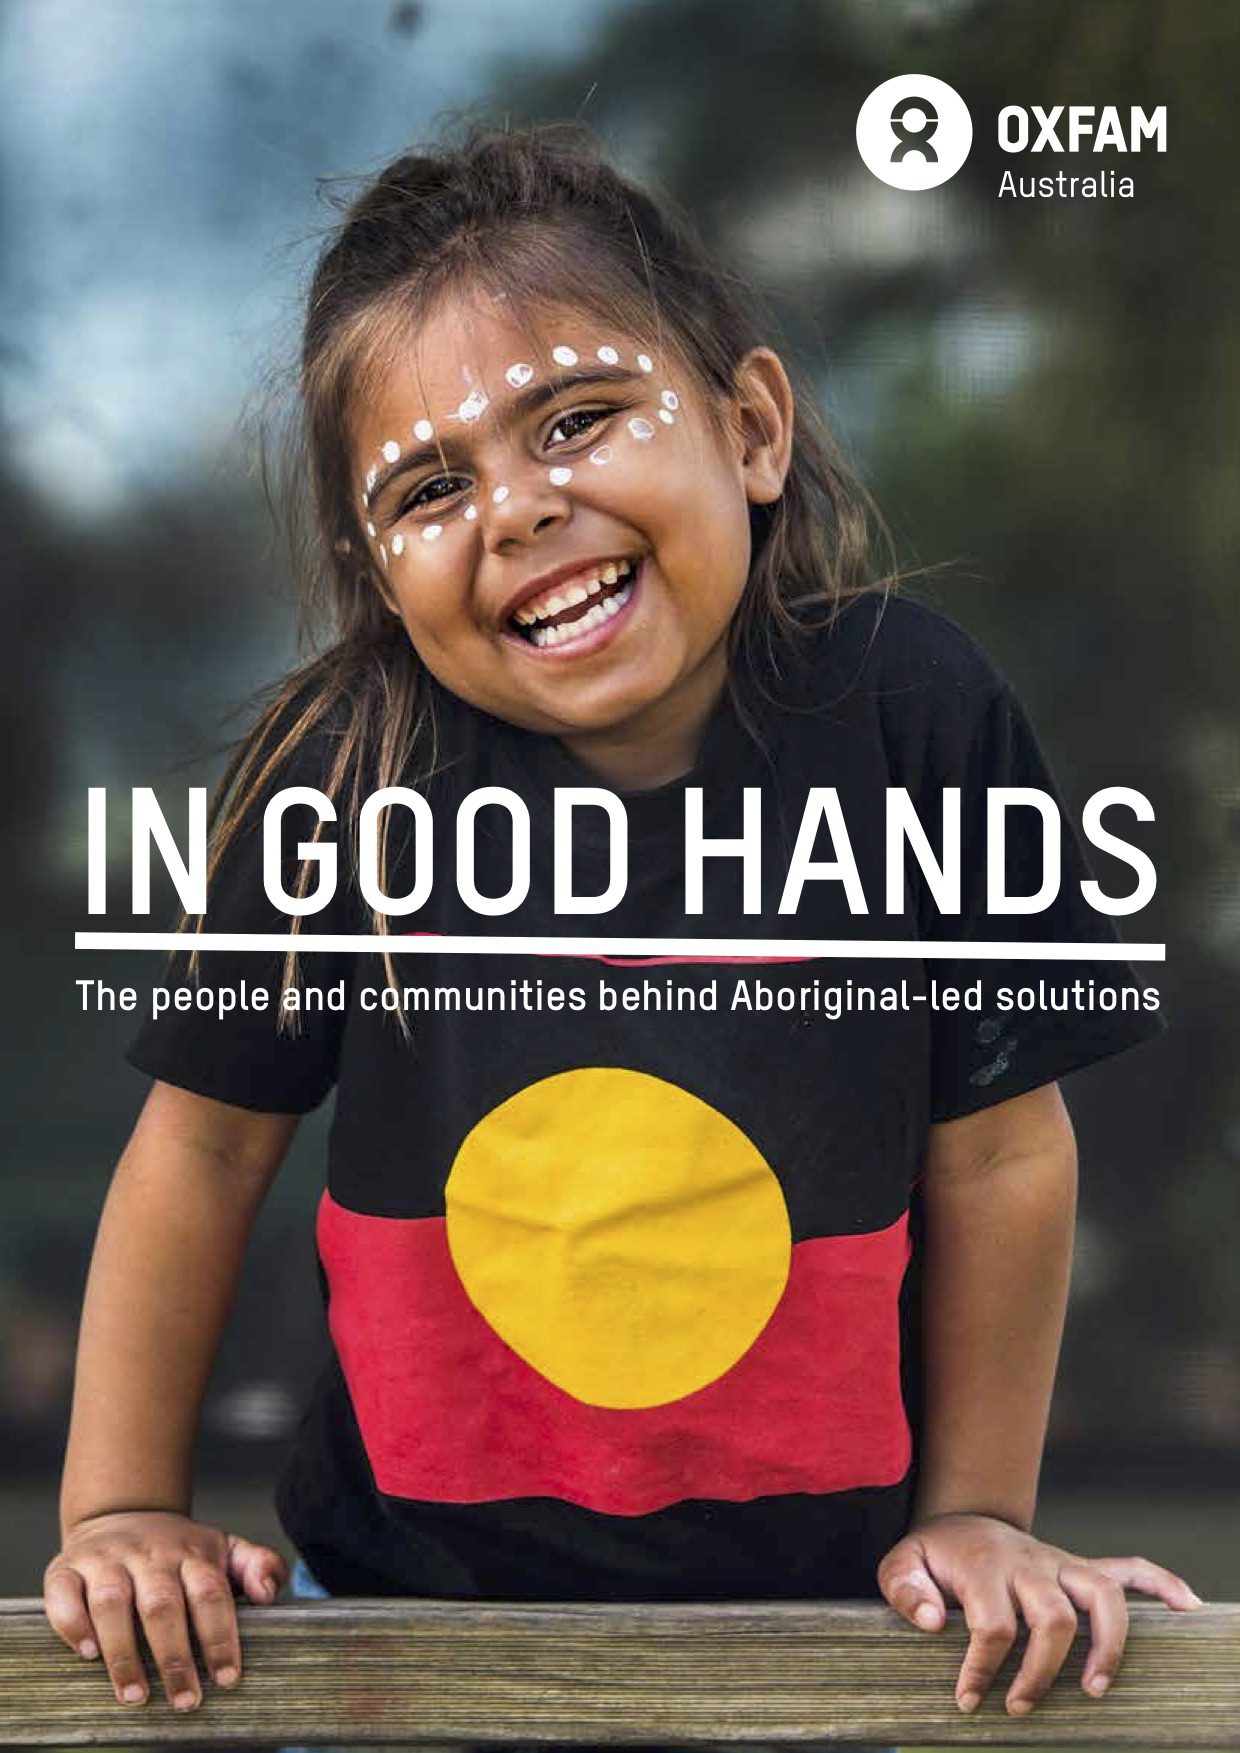 Oxfam’s report, In Good Hands, shows how programs that embrace the principle of self-determination have been rolled out extensively in the United States and other countries with similar historical settings, with better outcomes for Indigenous people than those achieved in Australia.